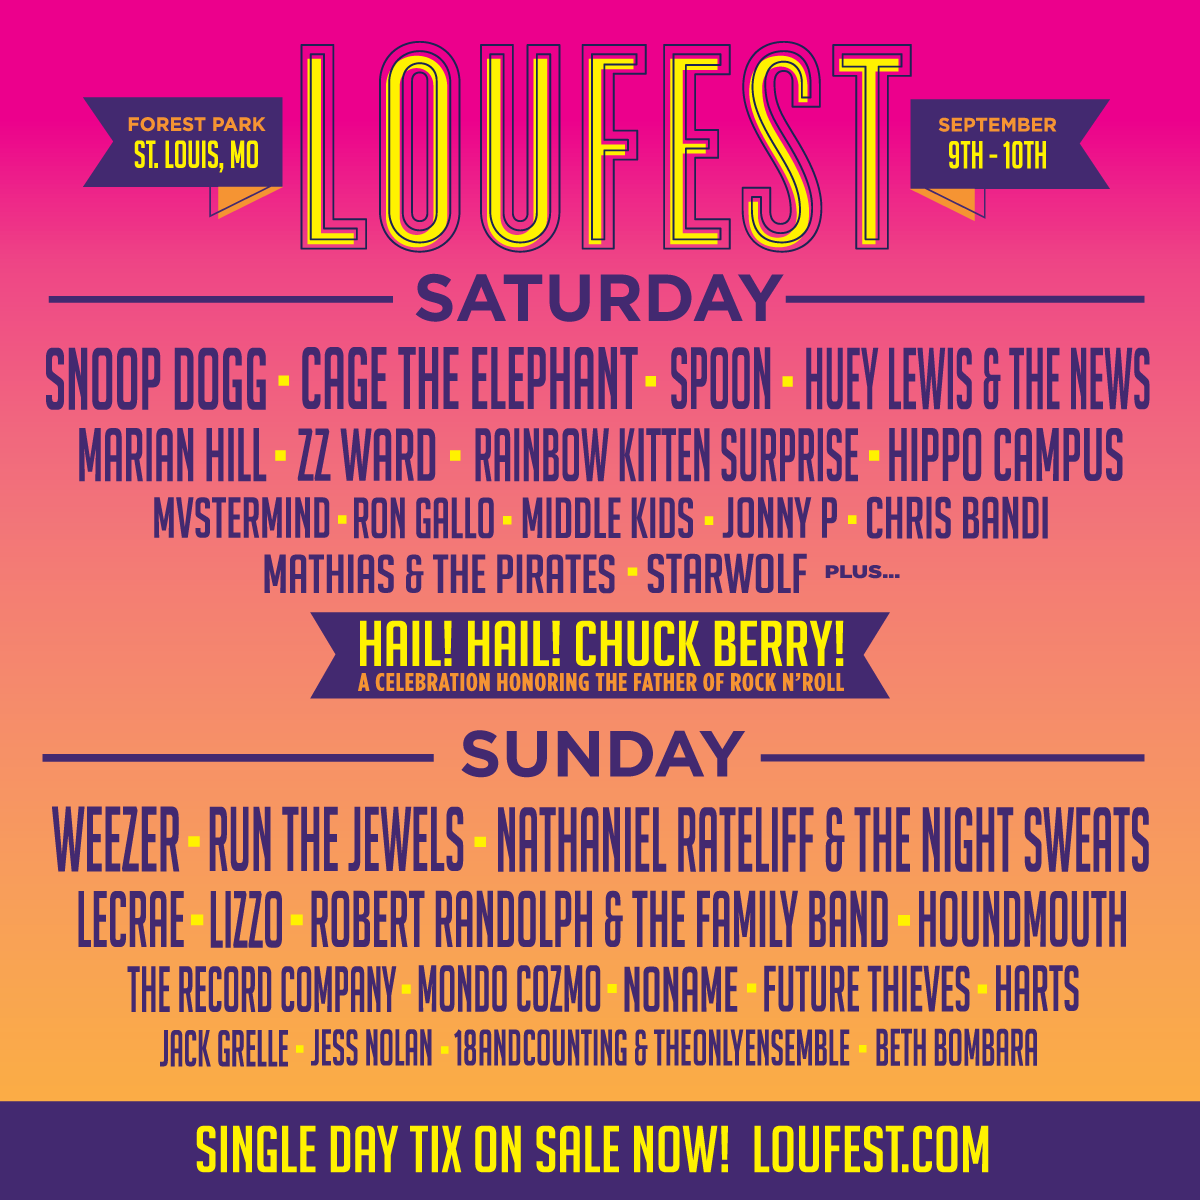 LouFest Music Festival daily schedule. Photo by: LouFest Music Festival